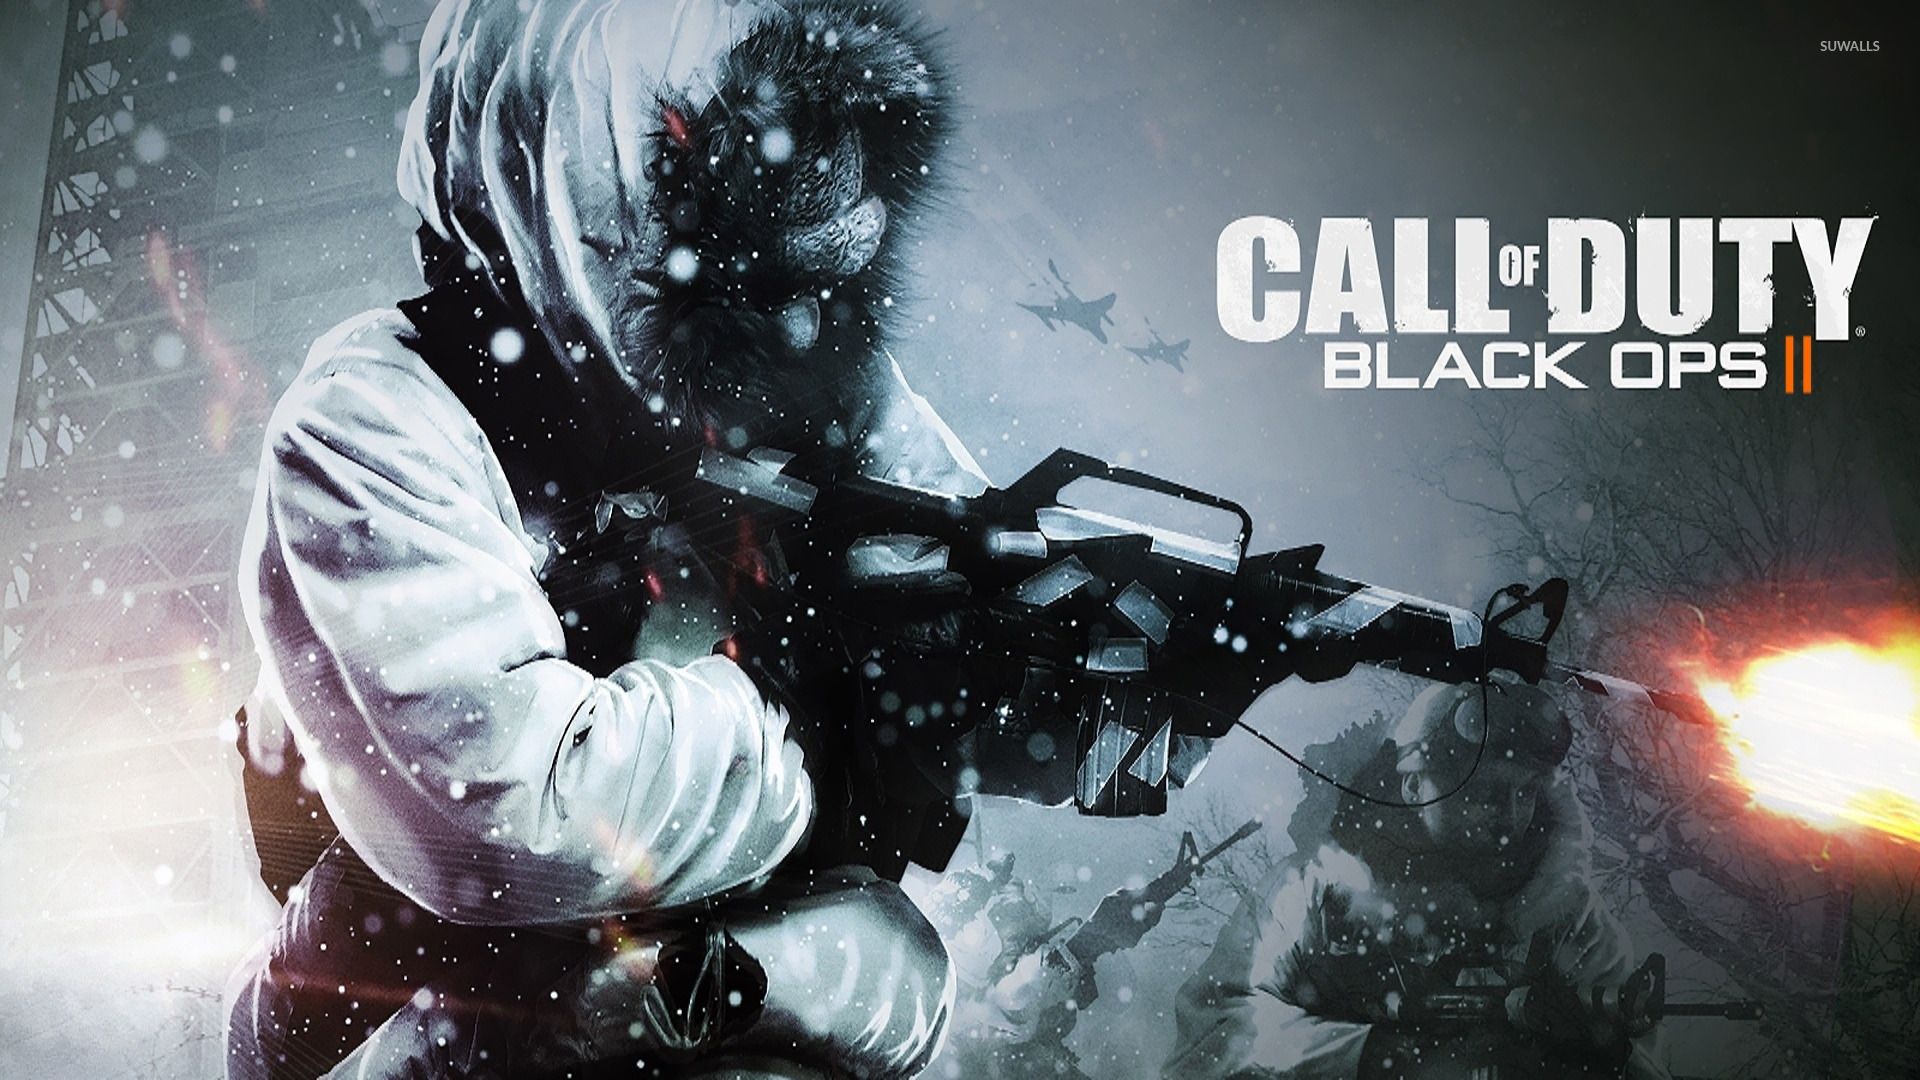 call of duty: black ops cold war pc key